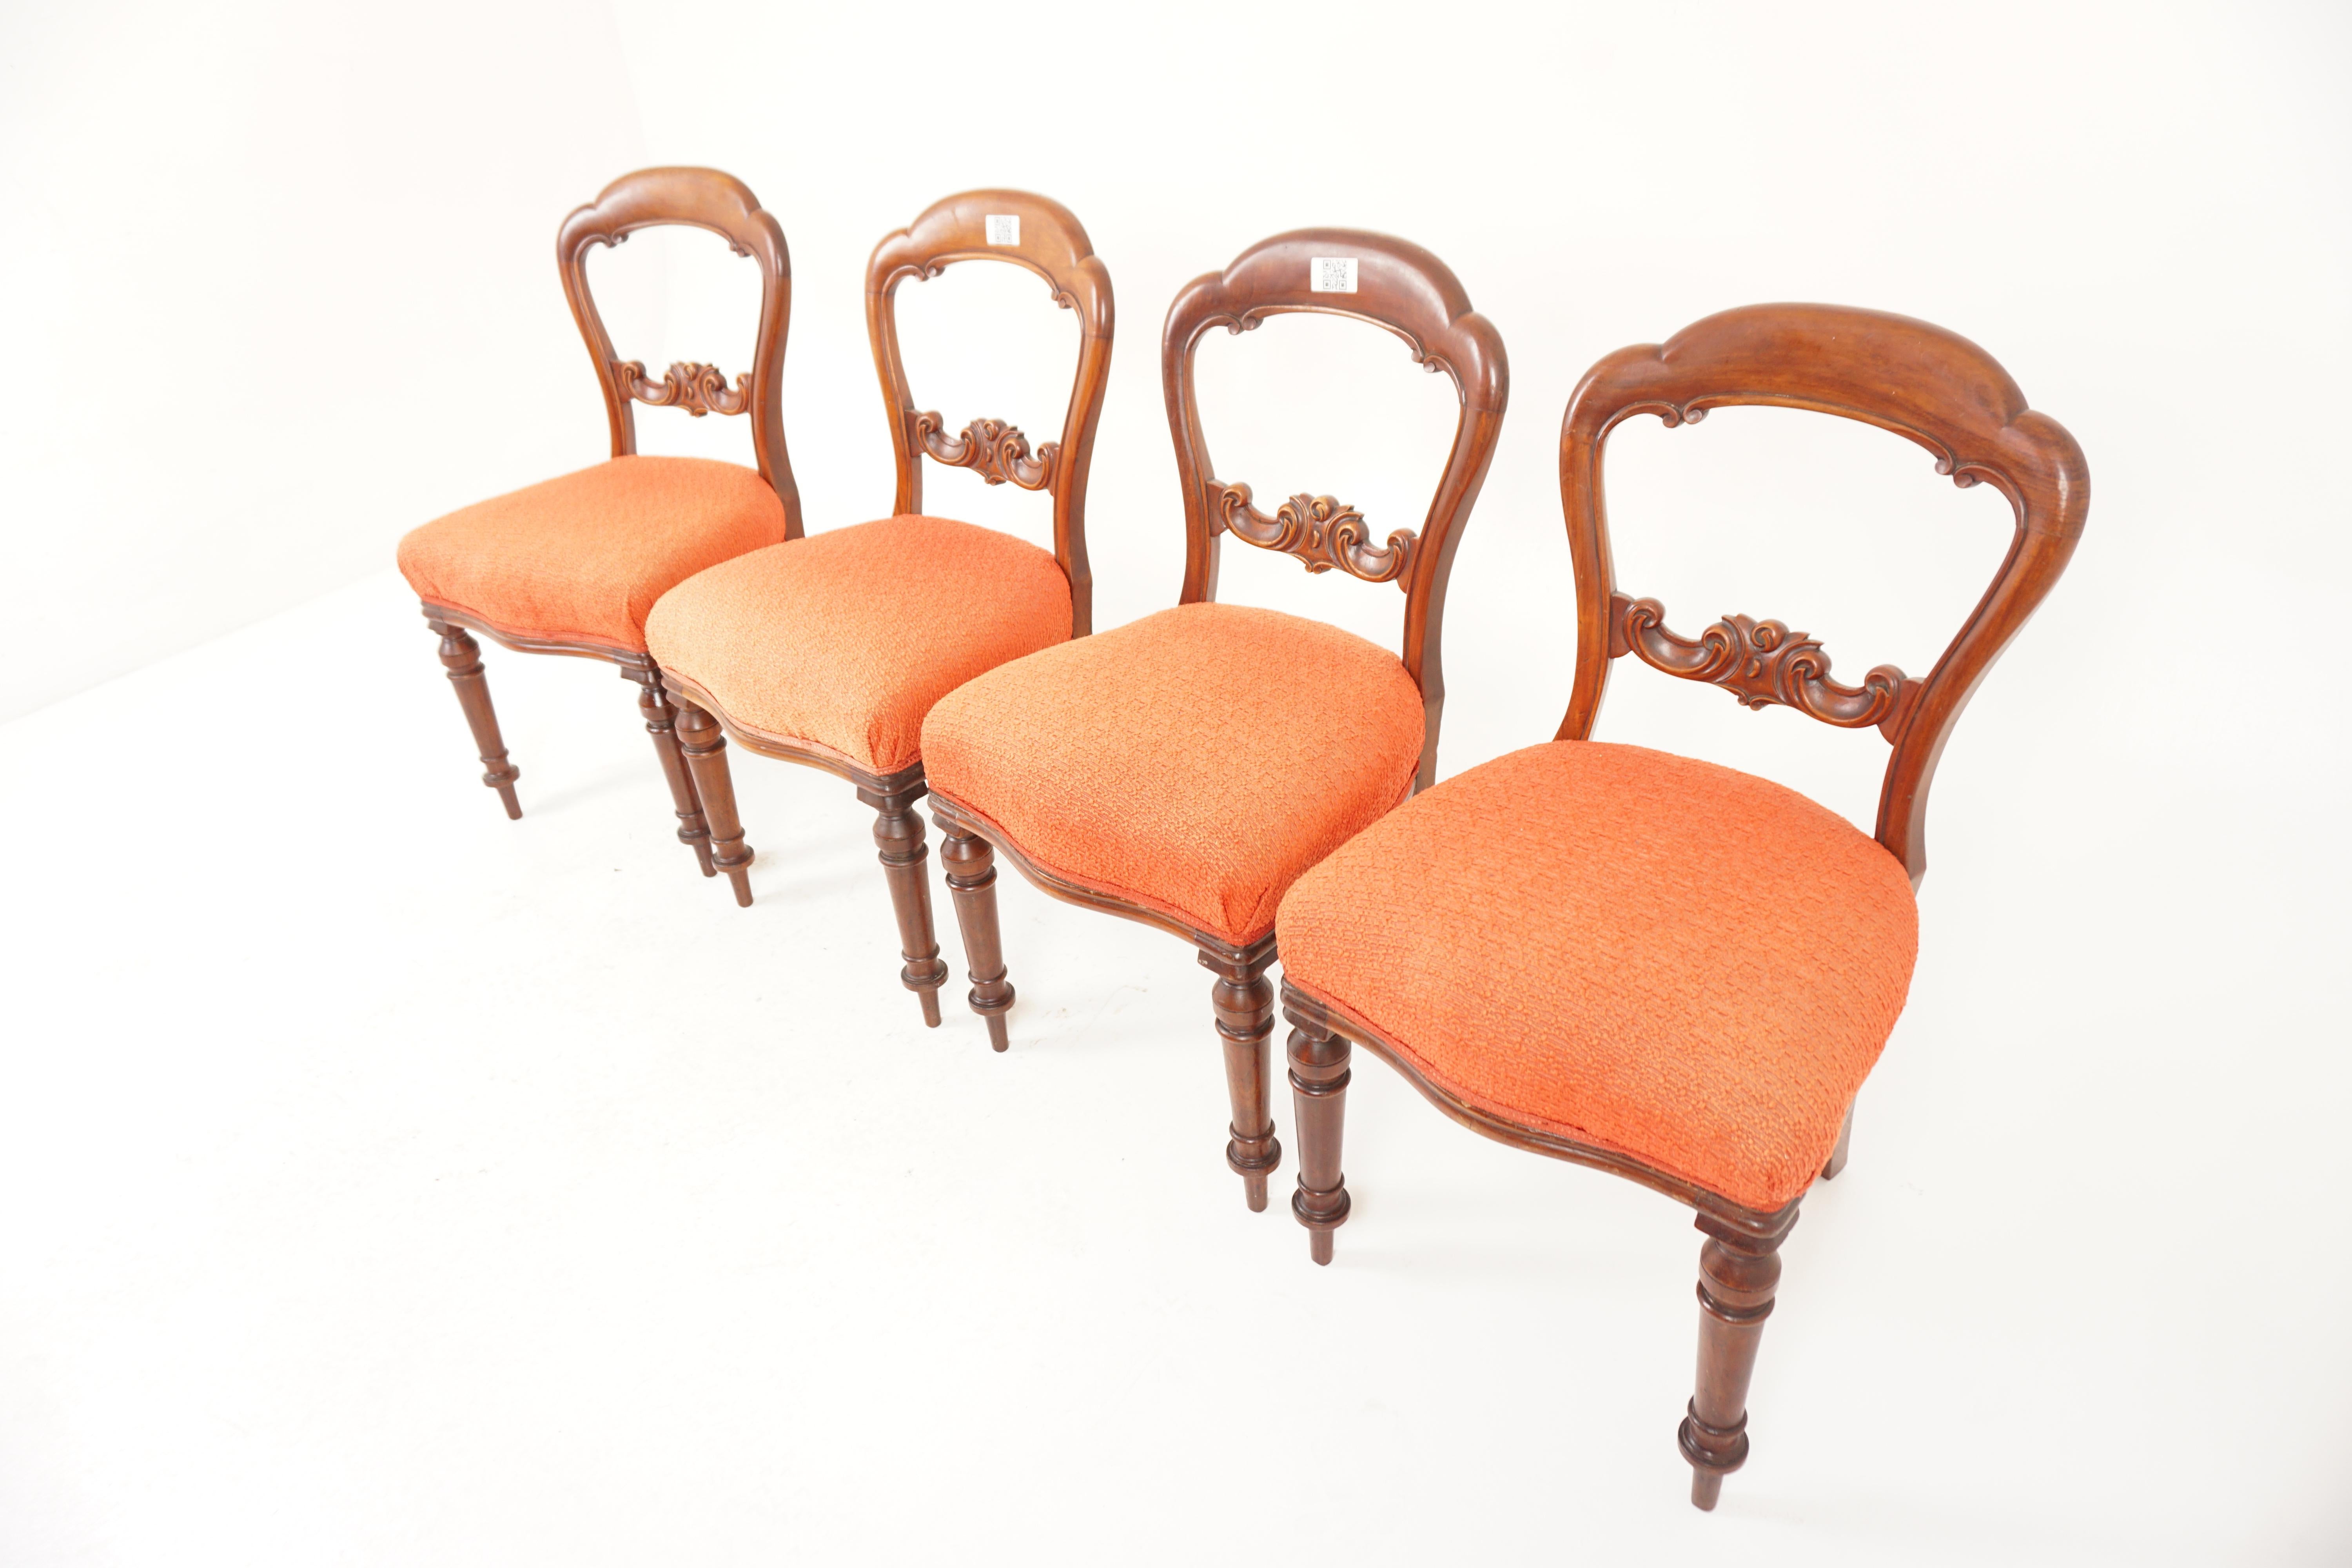 Antique Walnut Chairs, Set of 4 Victorian Balloon Back Dining Chairs, Antique Furniture, Scotland 1880, H952 

+ Scotland 1880
+ Solid Walnut
+ Original Finish
+ Typical Balloon Back with shaped top rail
+ With a carved foliate design along